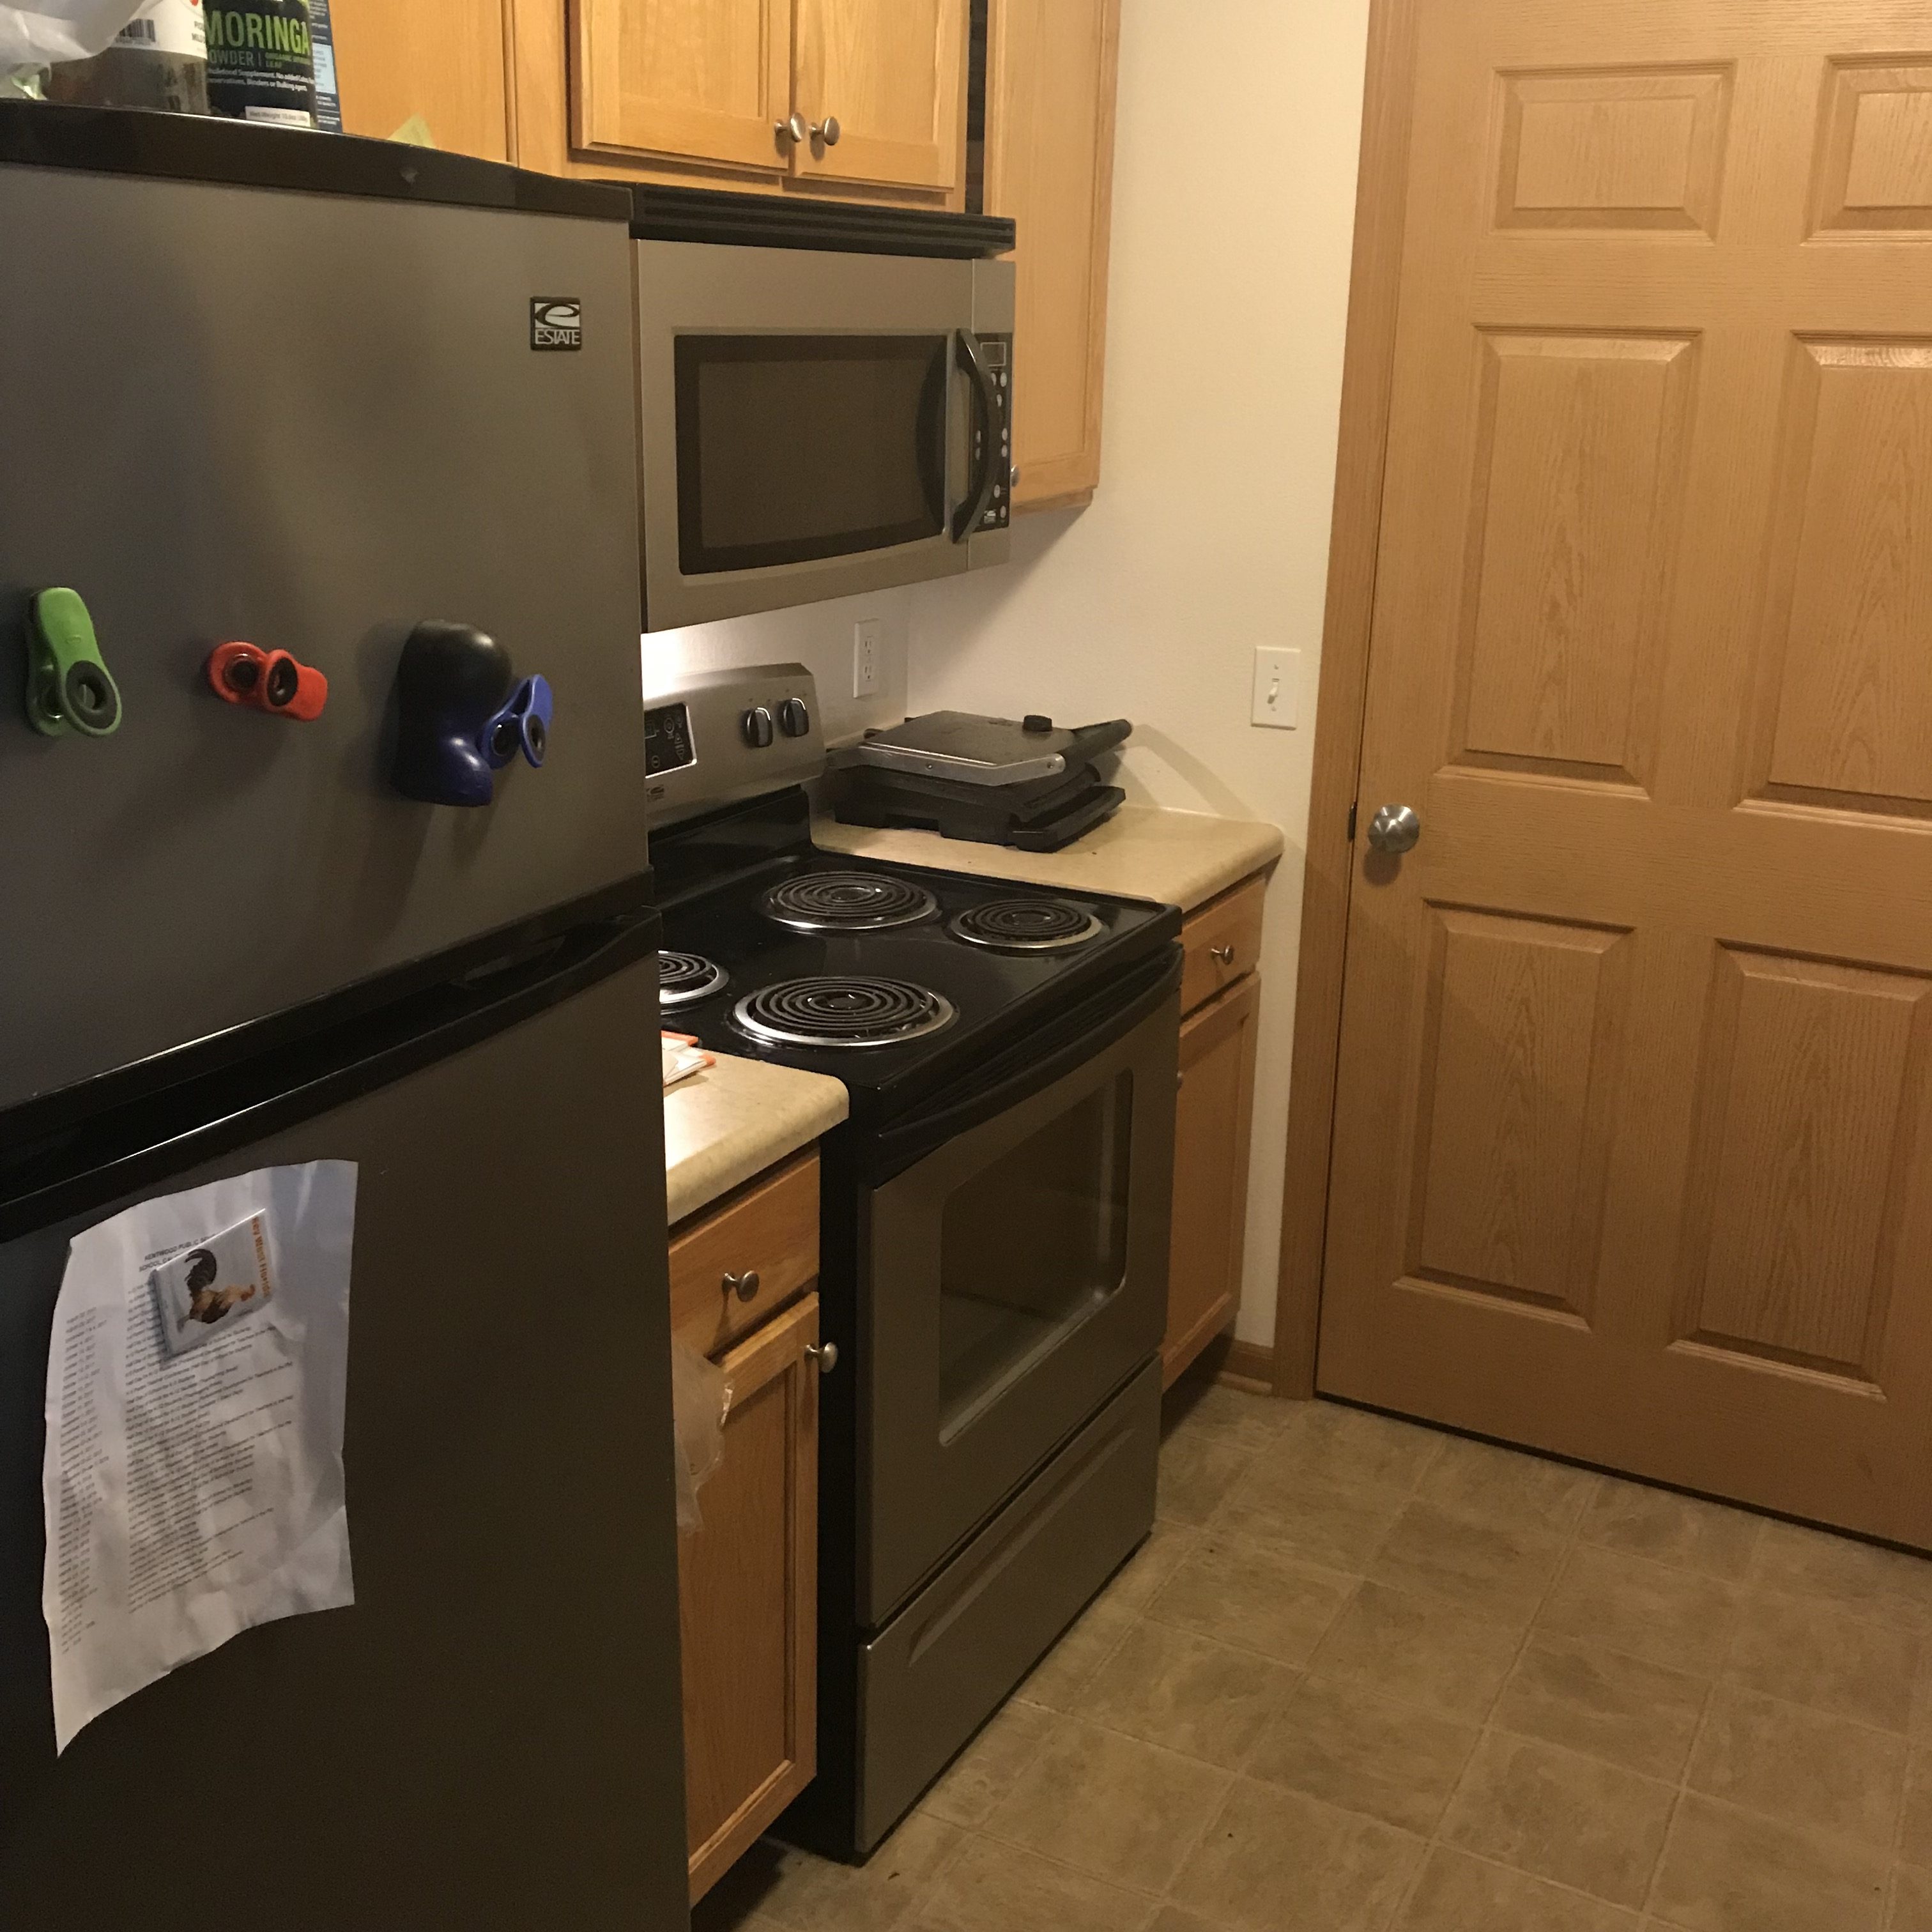 Tired kitchen contest - entry 1